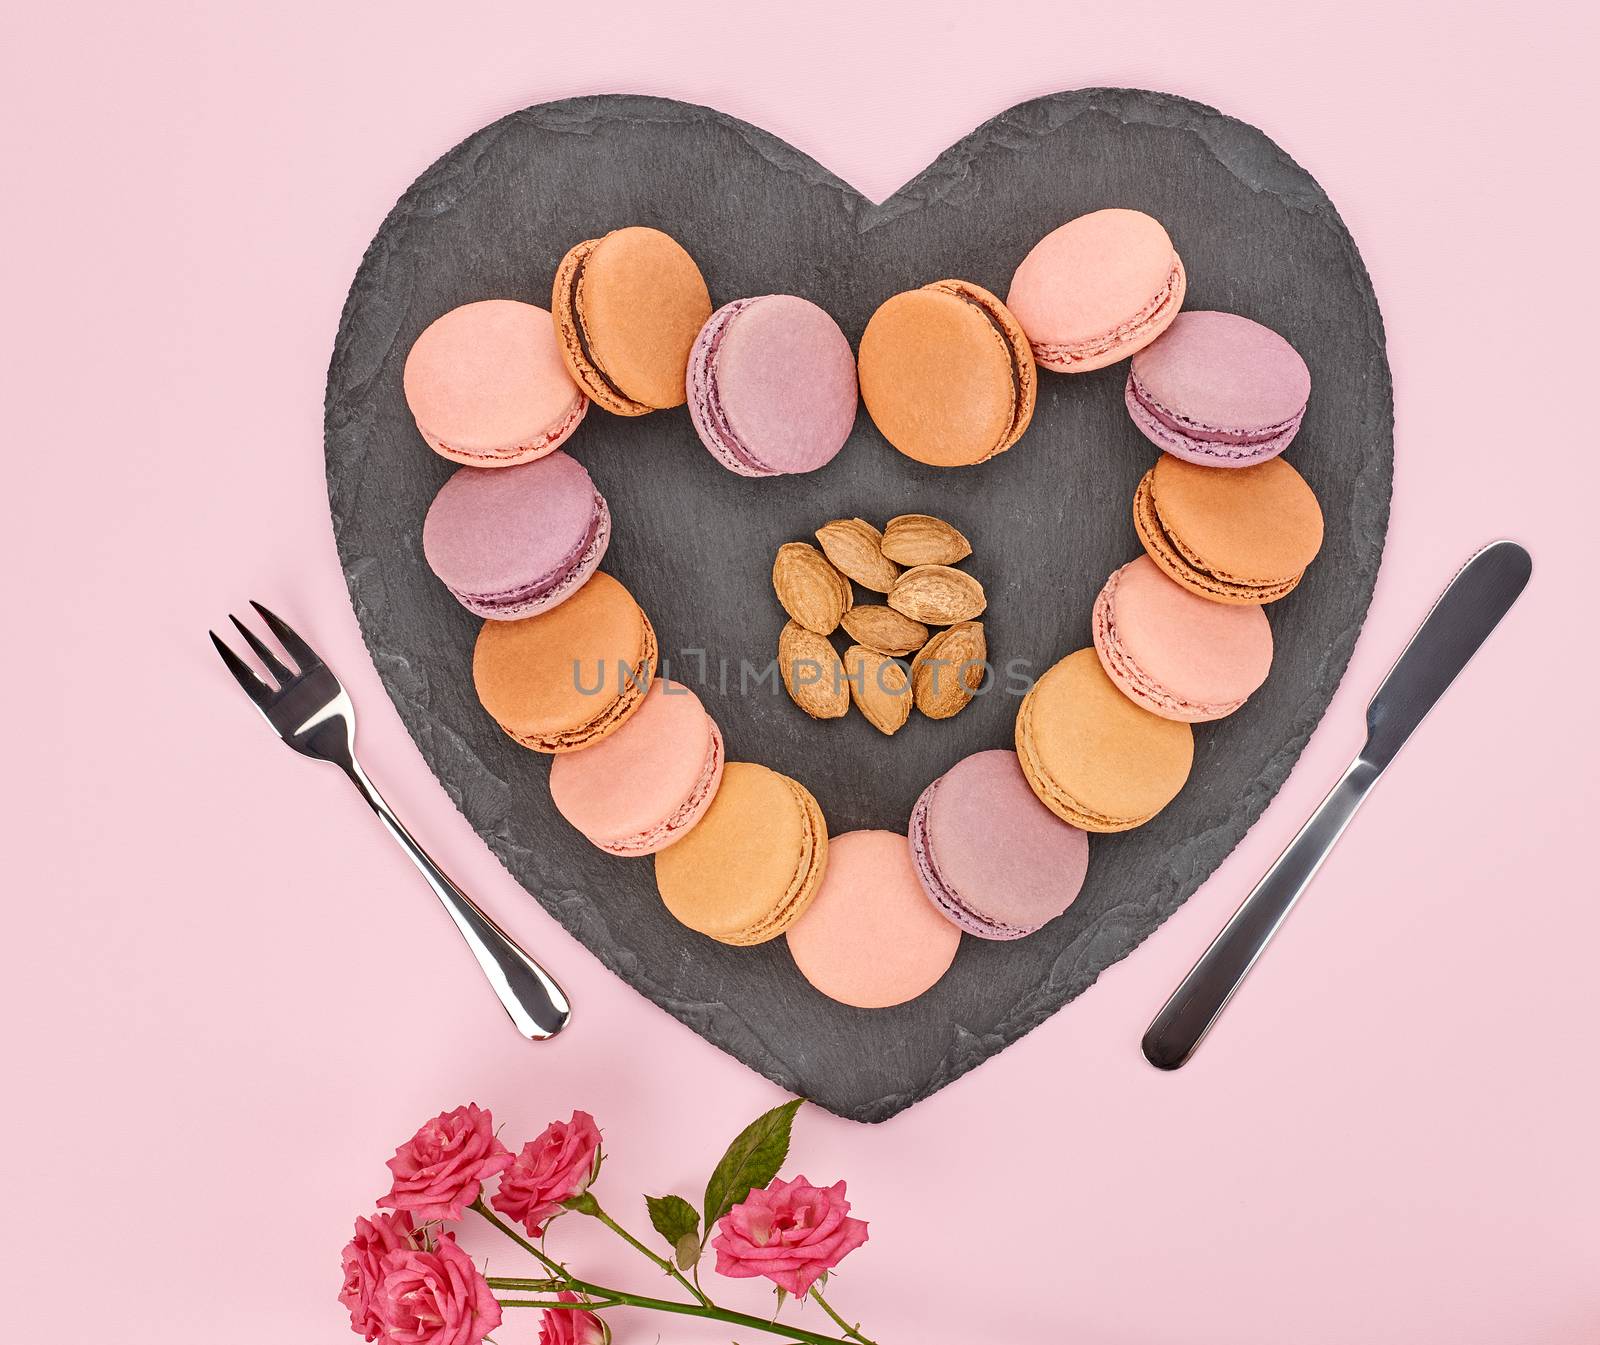 Still life, macarons sweet colorful, heart shape, fork knife. Black placemat, roses almond. French dessert, table setting. Unusual creative romantic, pink background. Concept love story.Valentines Day